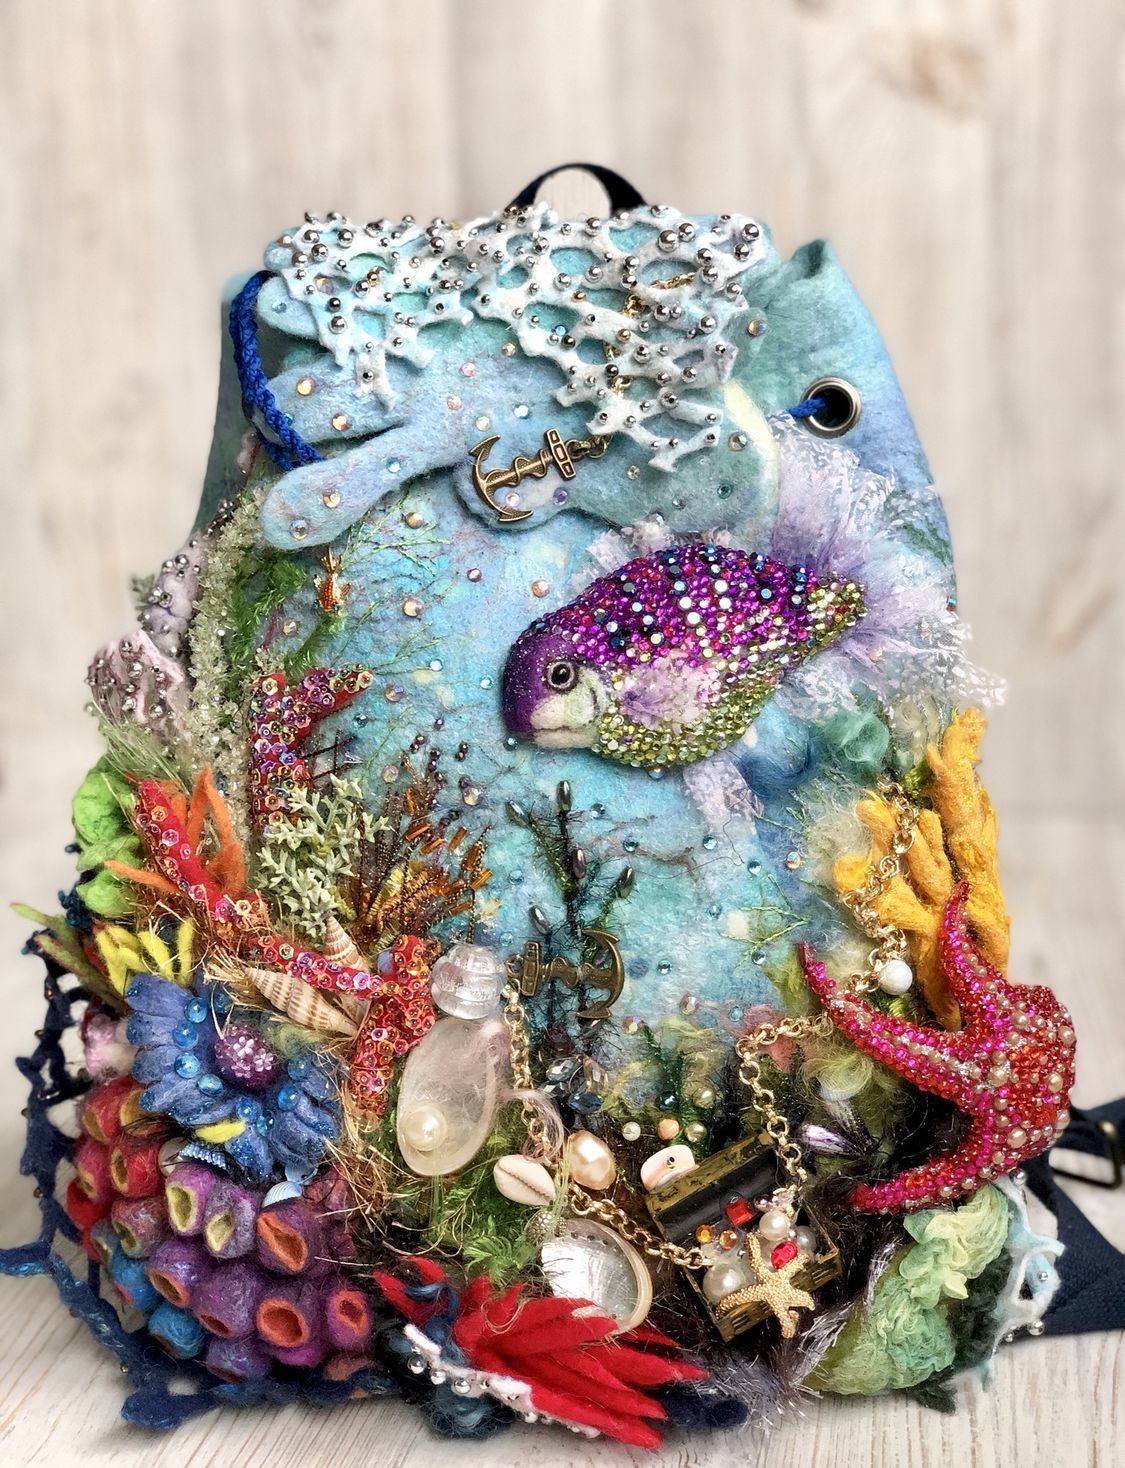 Intricate And Whimsical Hand Embroidered Felted Bags By Alena Kova (21)